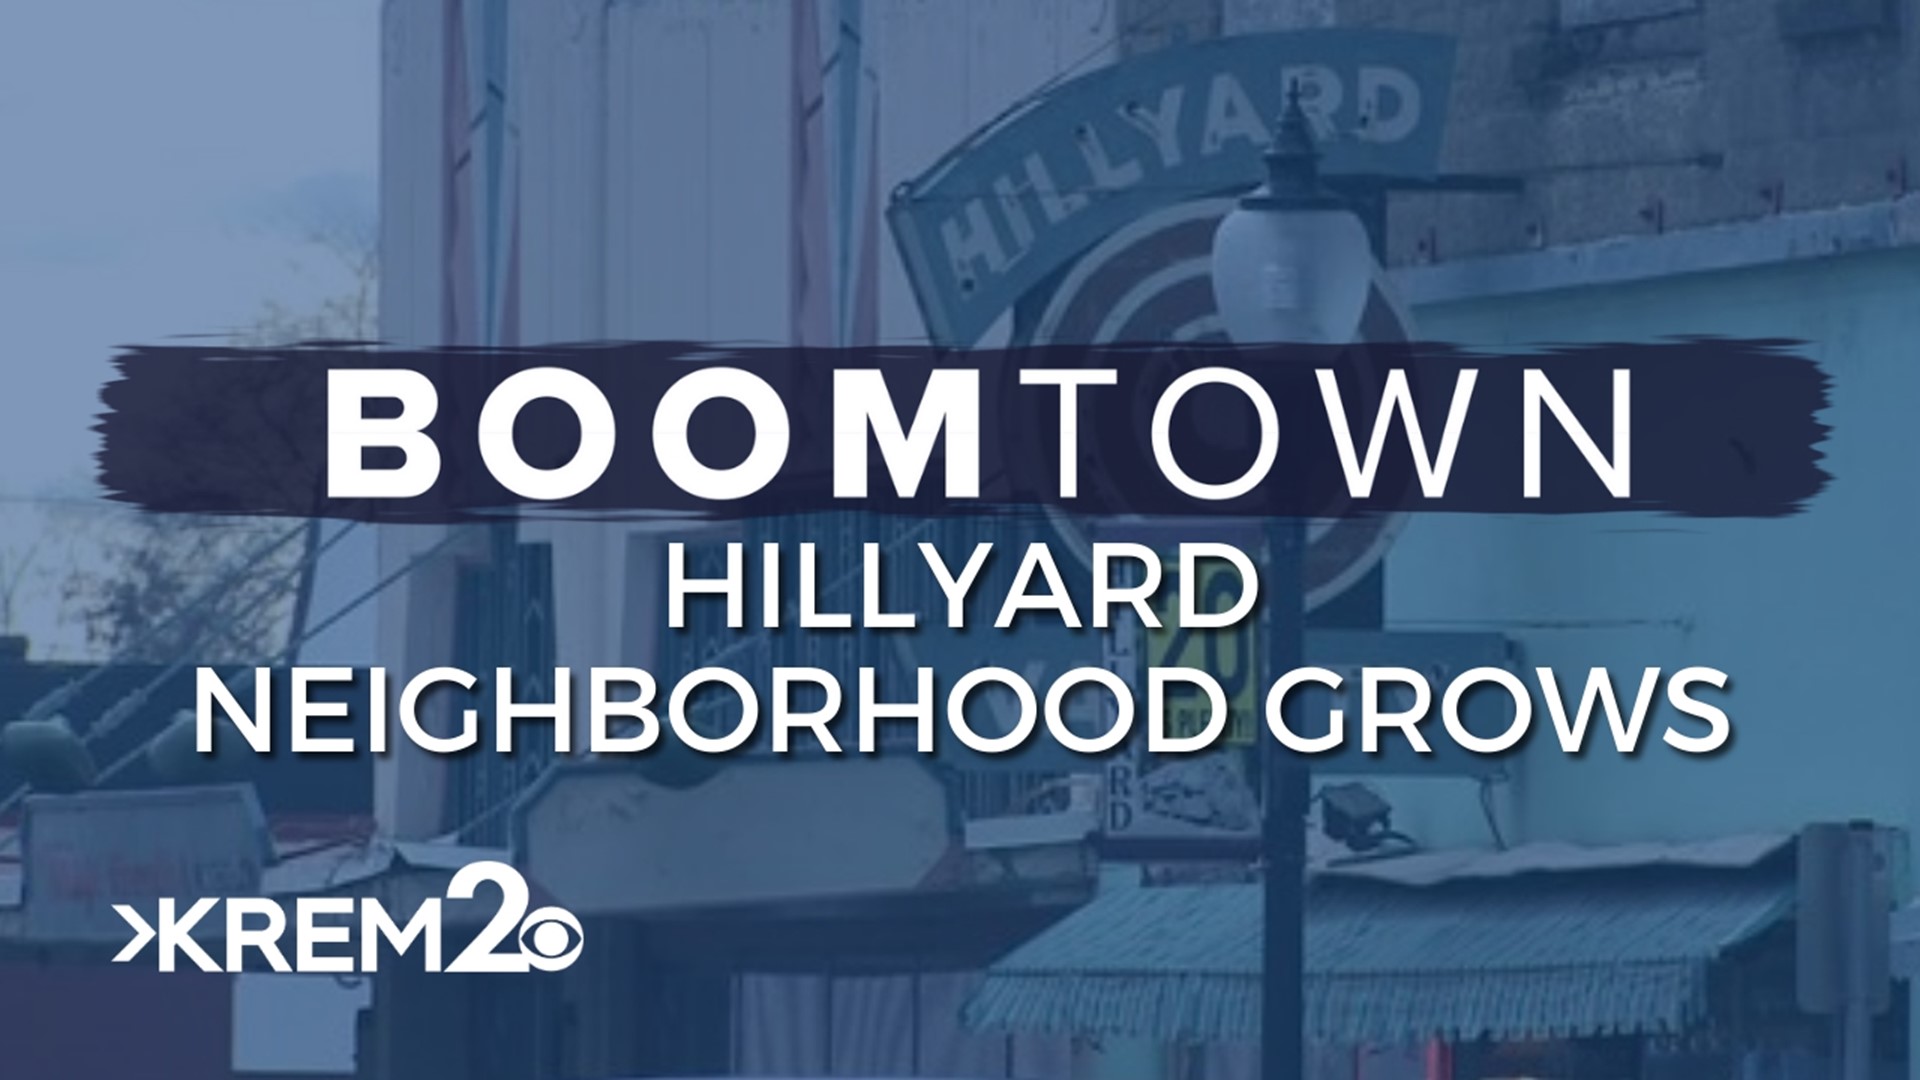 Despite it's proud history, Hillyard has seen some tough times. Now, a wave of work is taking place to bring some shine back to the neighborhood.